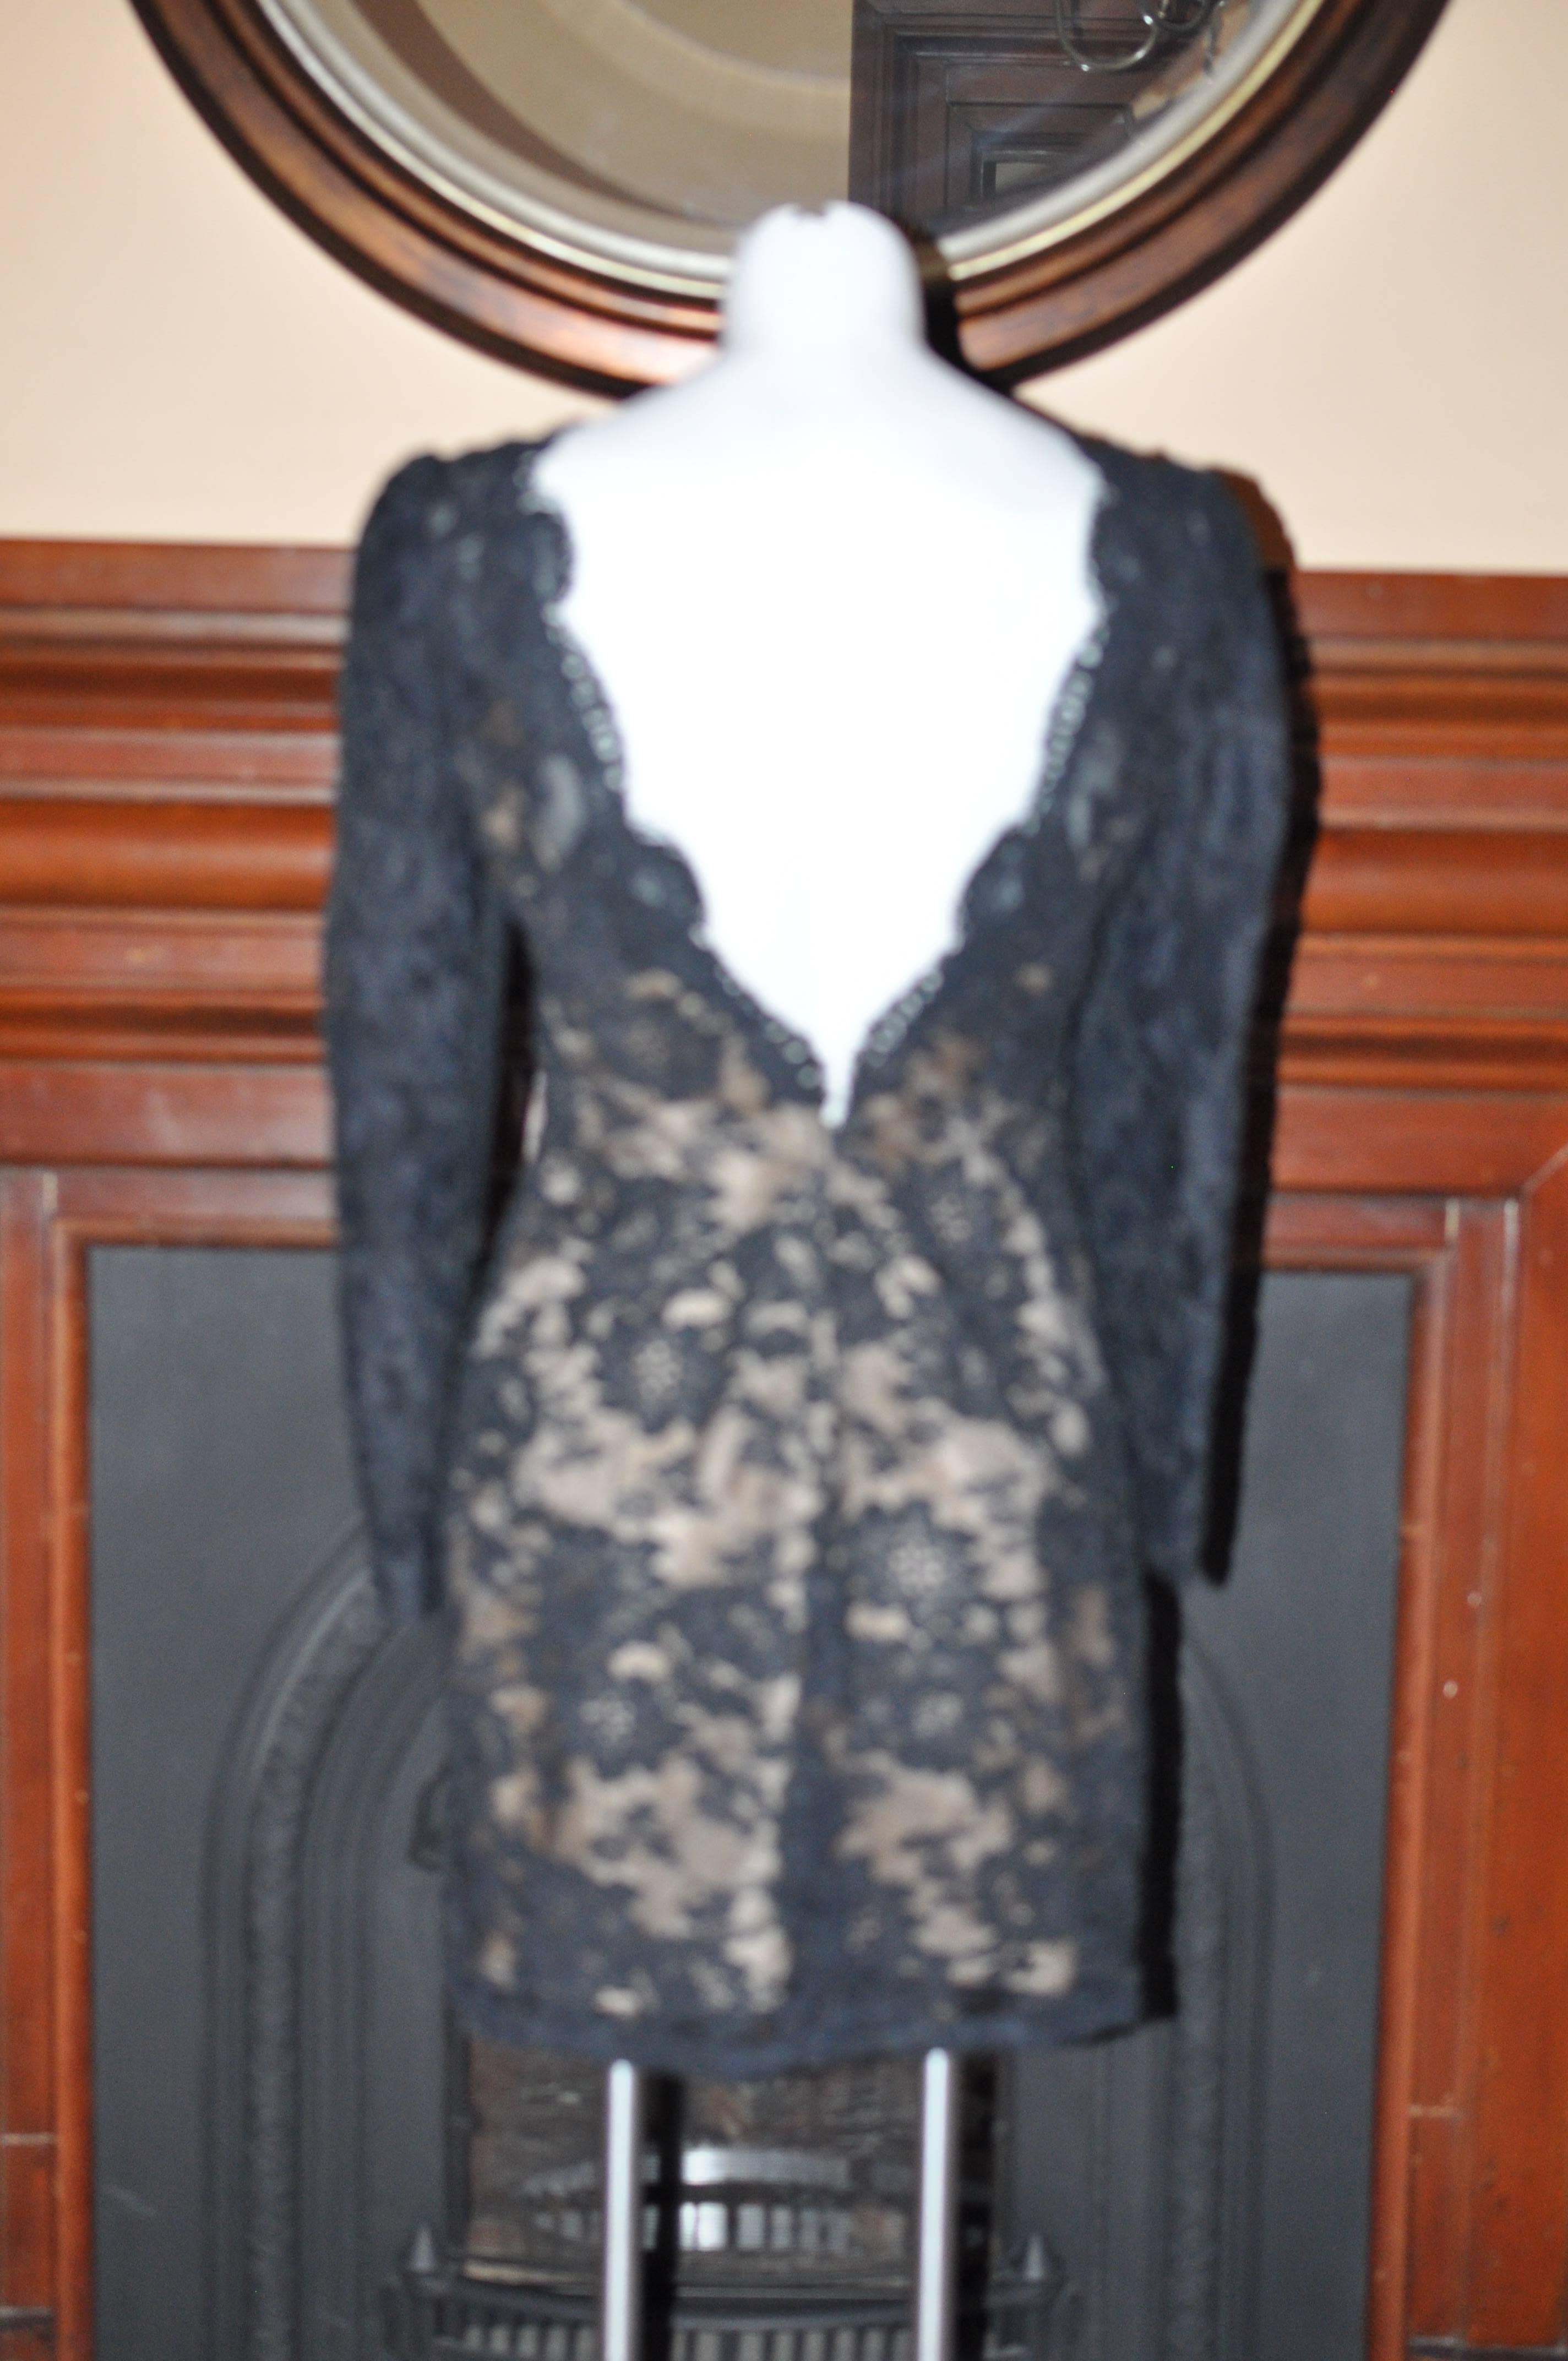 A sophisticated dress made of cotton, nylon and rayon, with a peach colored lining.

Nice heavy lace with a floral pattern and clearly raised borders. The neckline is see-through as are the lined sleeves.

There is a built in bra.